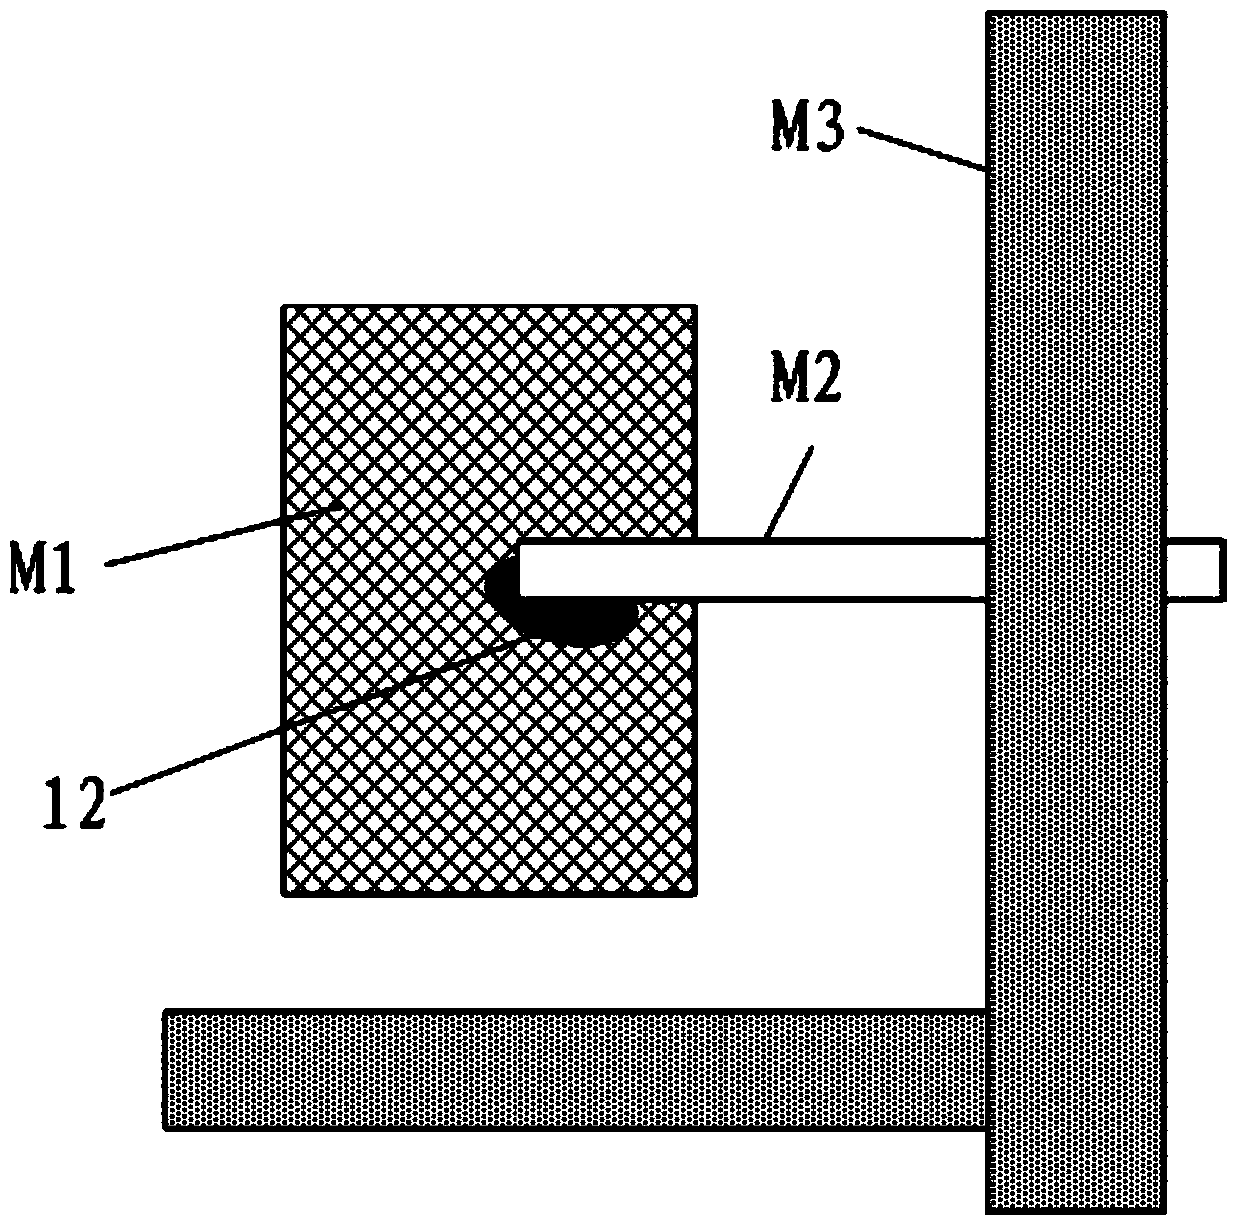 Focused ion beam sample preparation method for precisely positioning front-layer defects